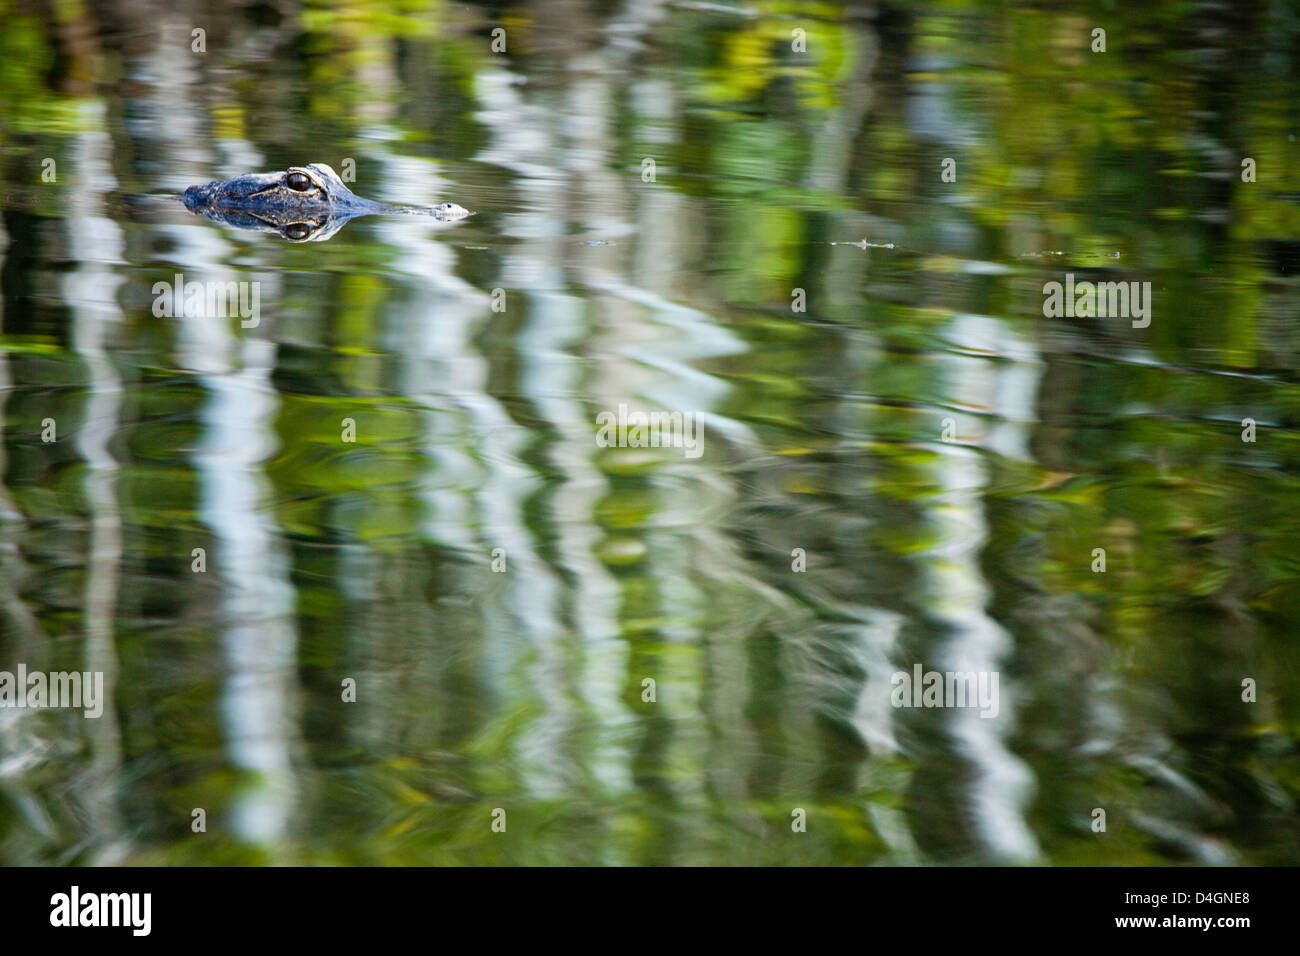 An American alligator, Alligator mississippiensis, on a surface reflection of foliage, Everglades National Park, Florida. Stock Photo